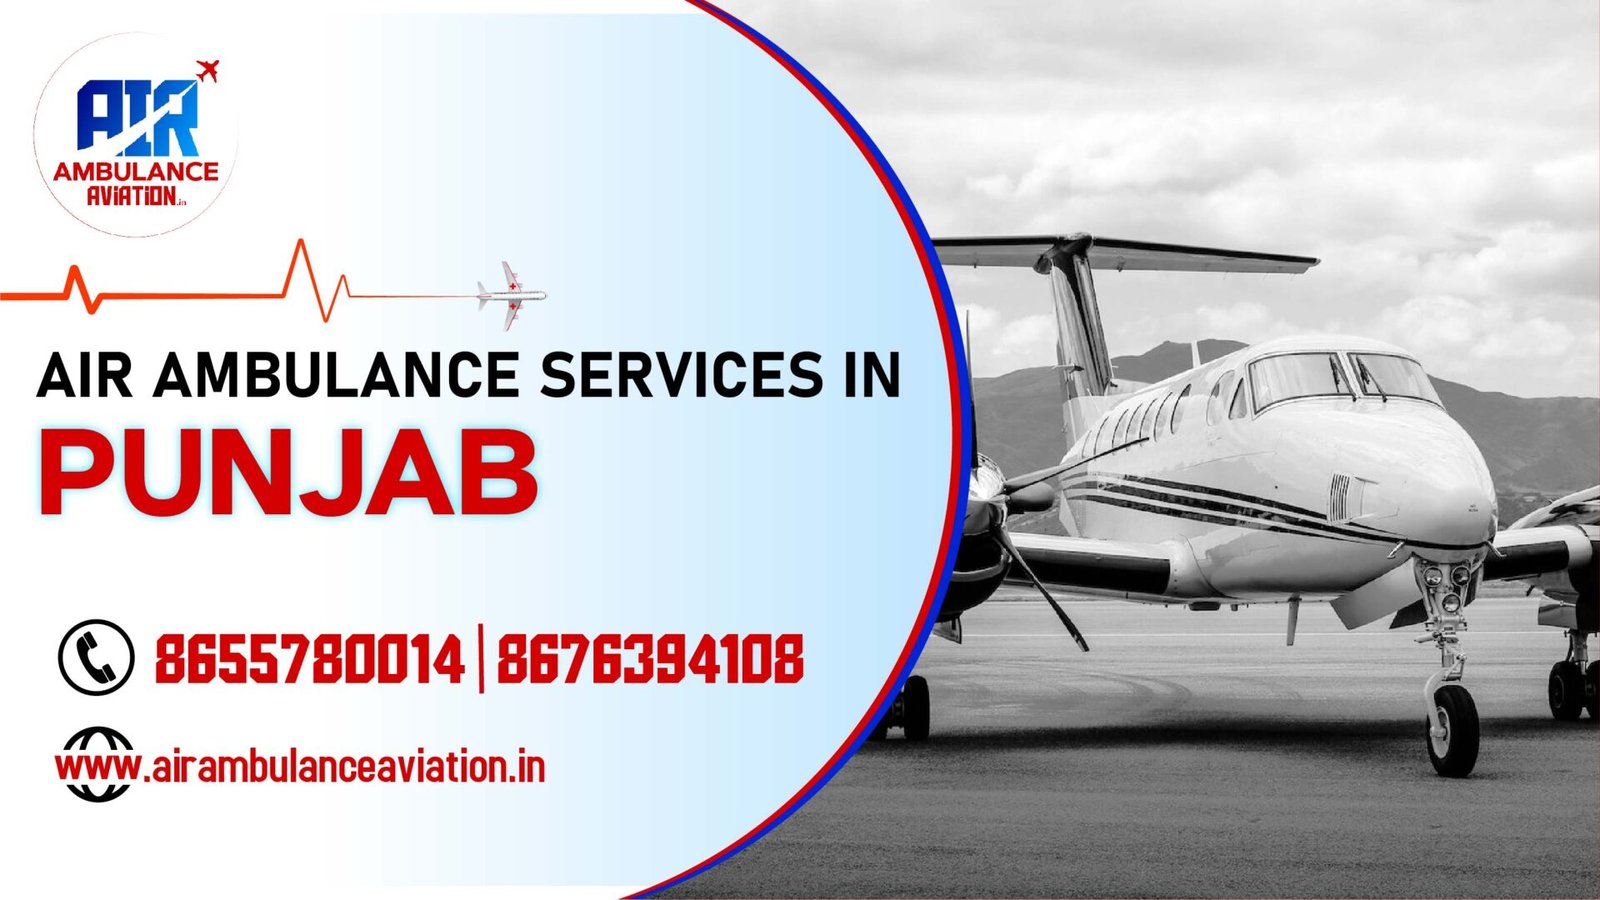 Air Ambulance services in Punjab